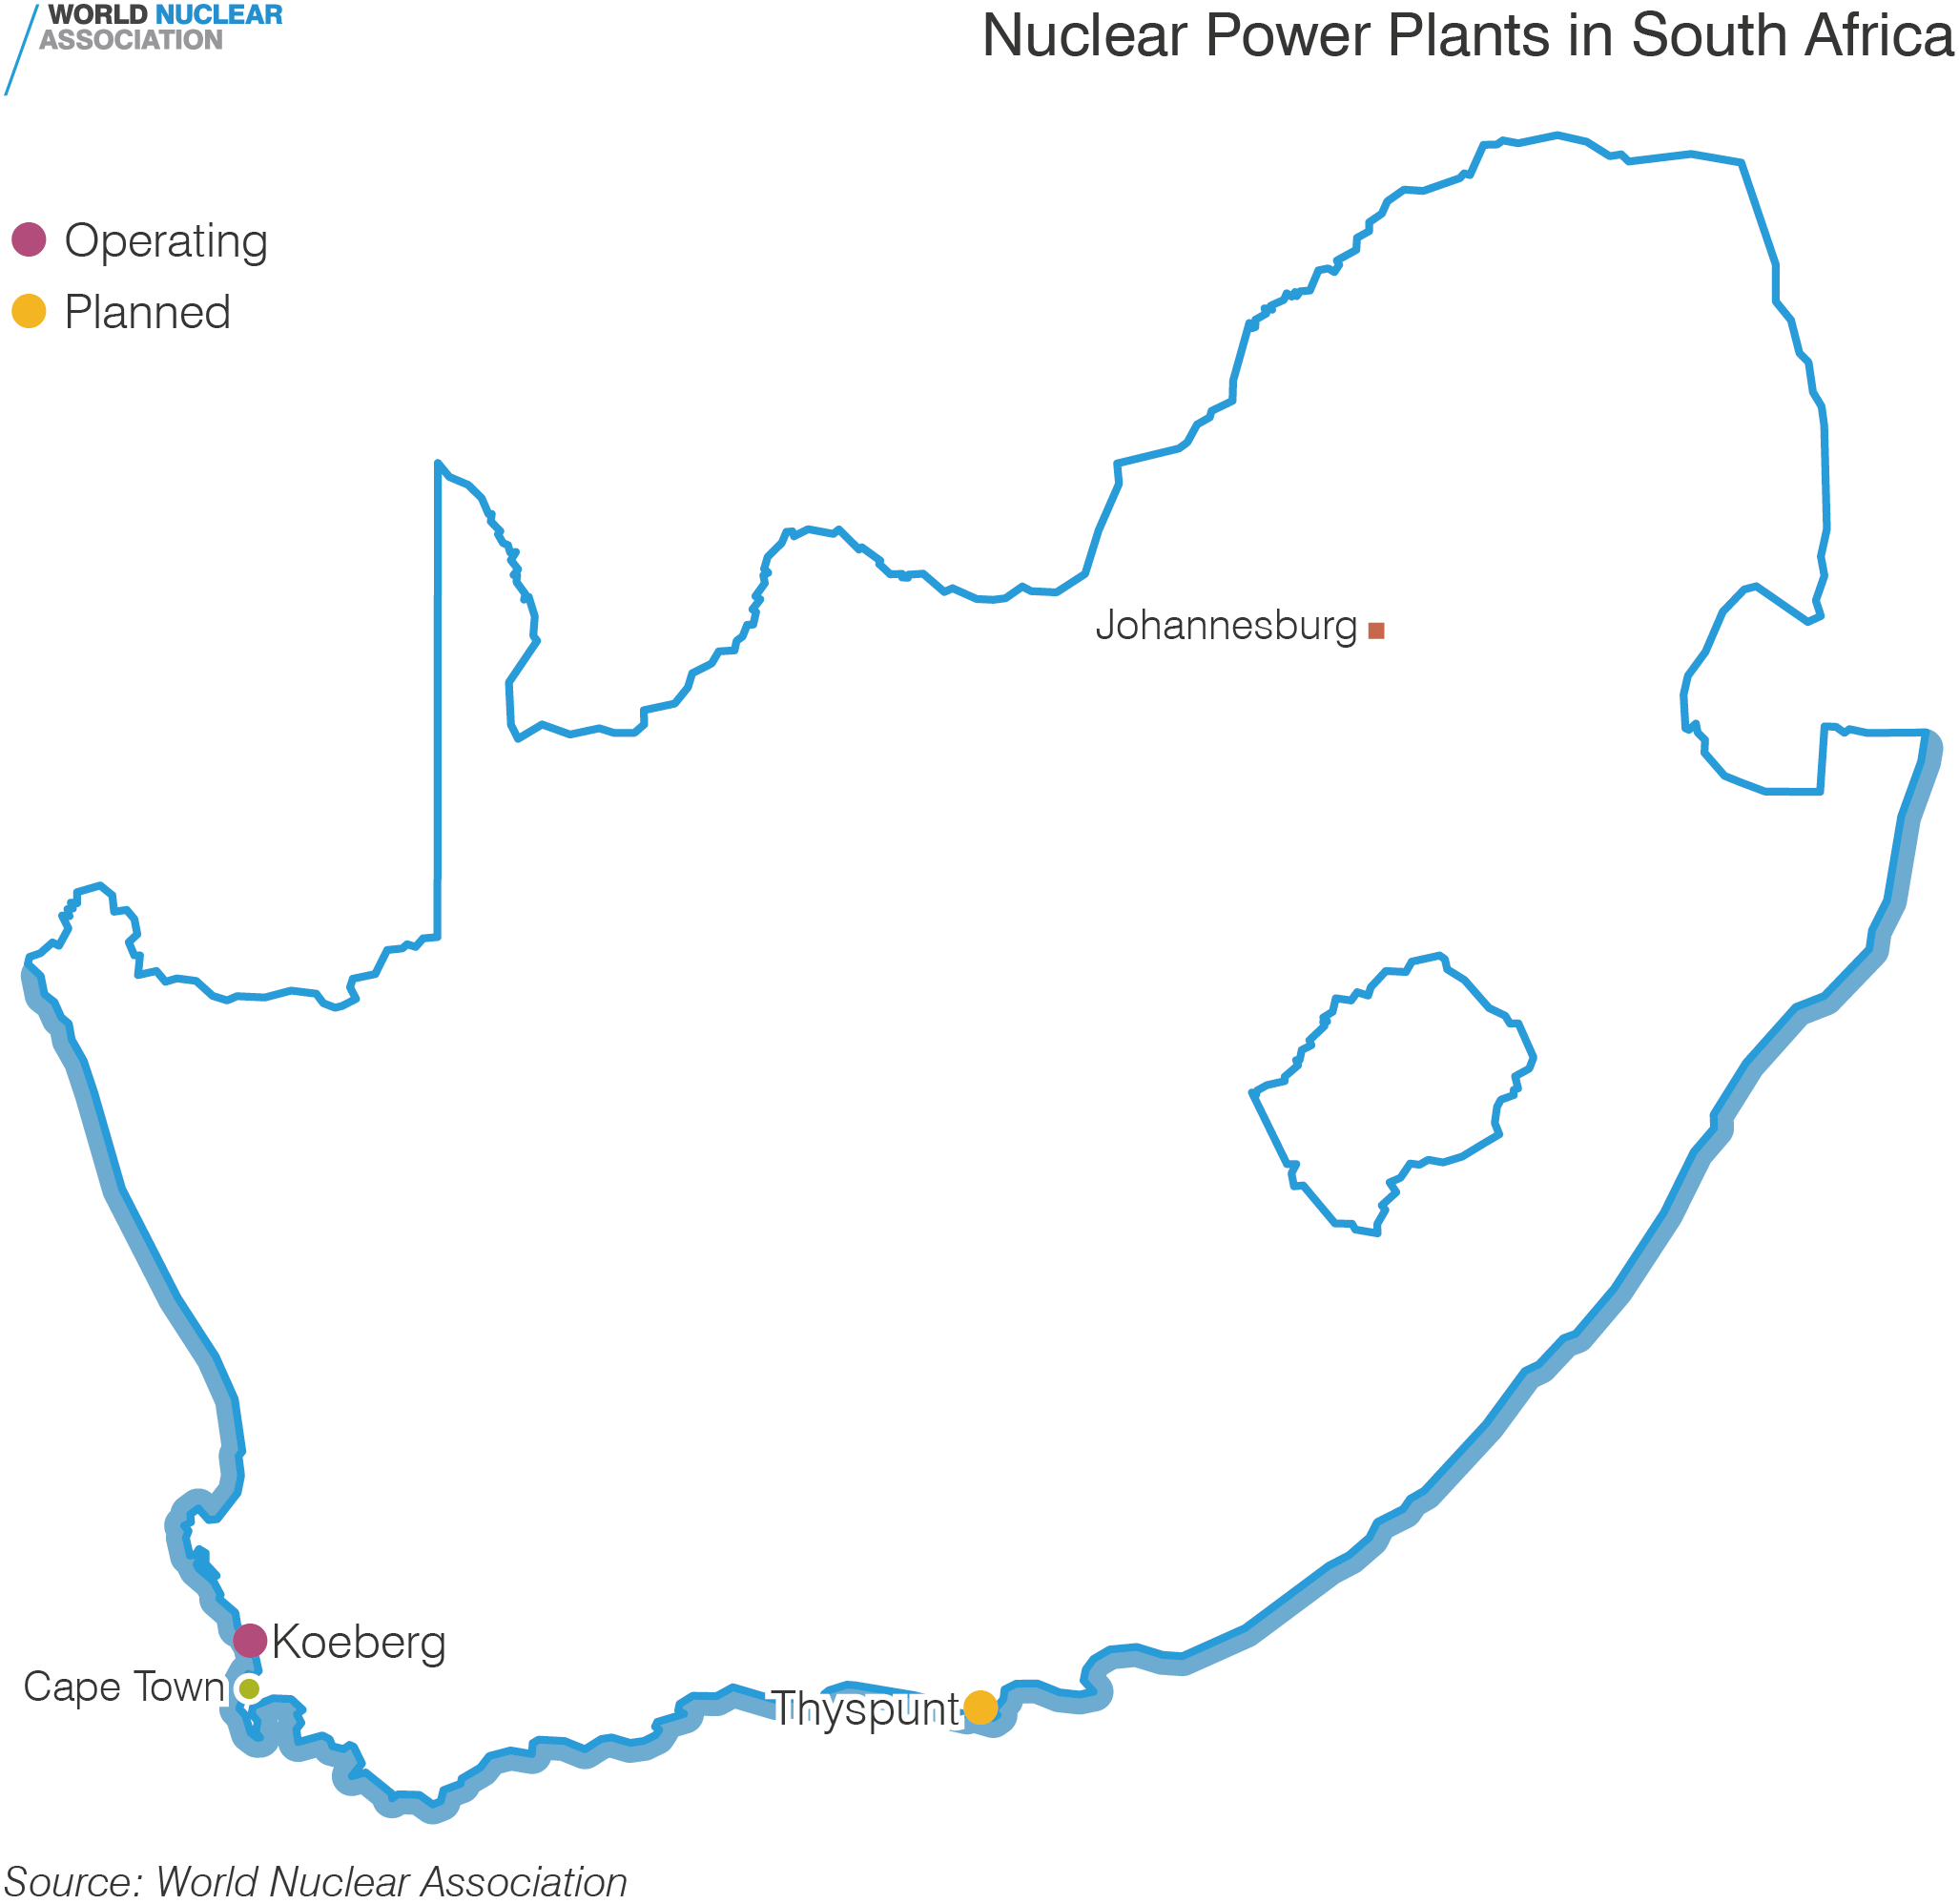 Nuclear Power Plants in South Africa